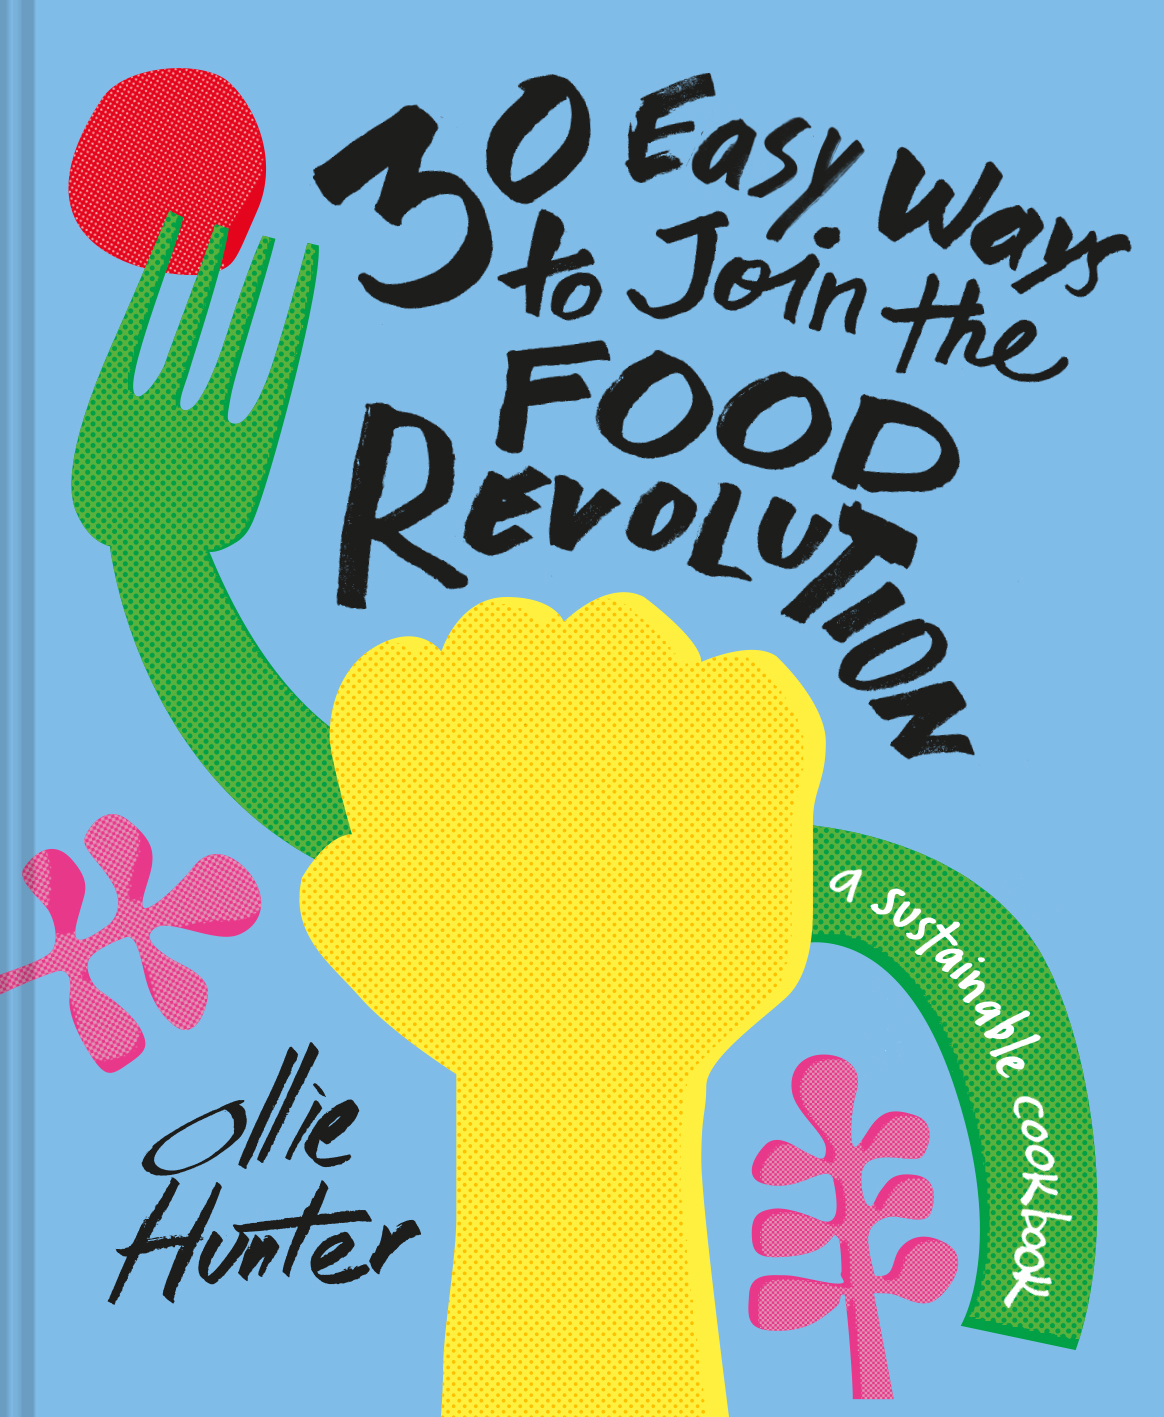 30 Easy Ways to Join the Food Revolution recipe book